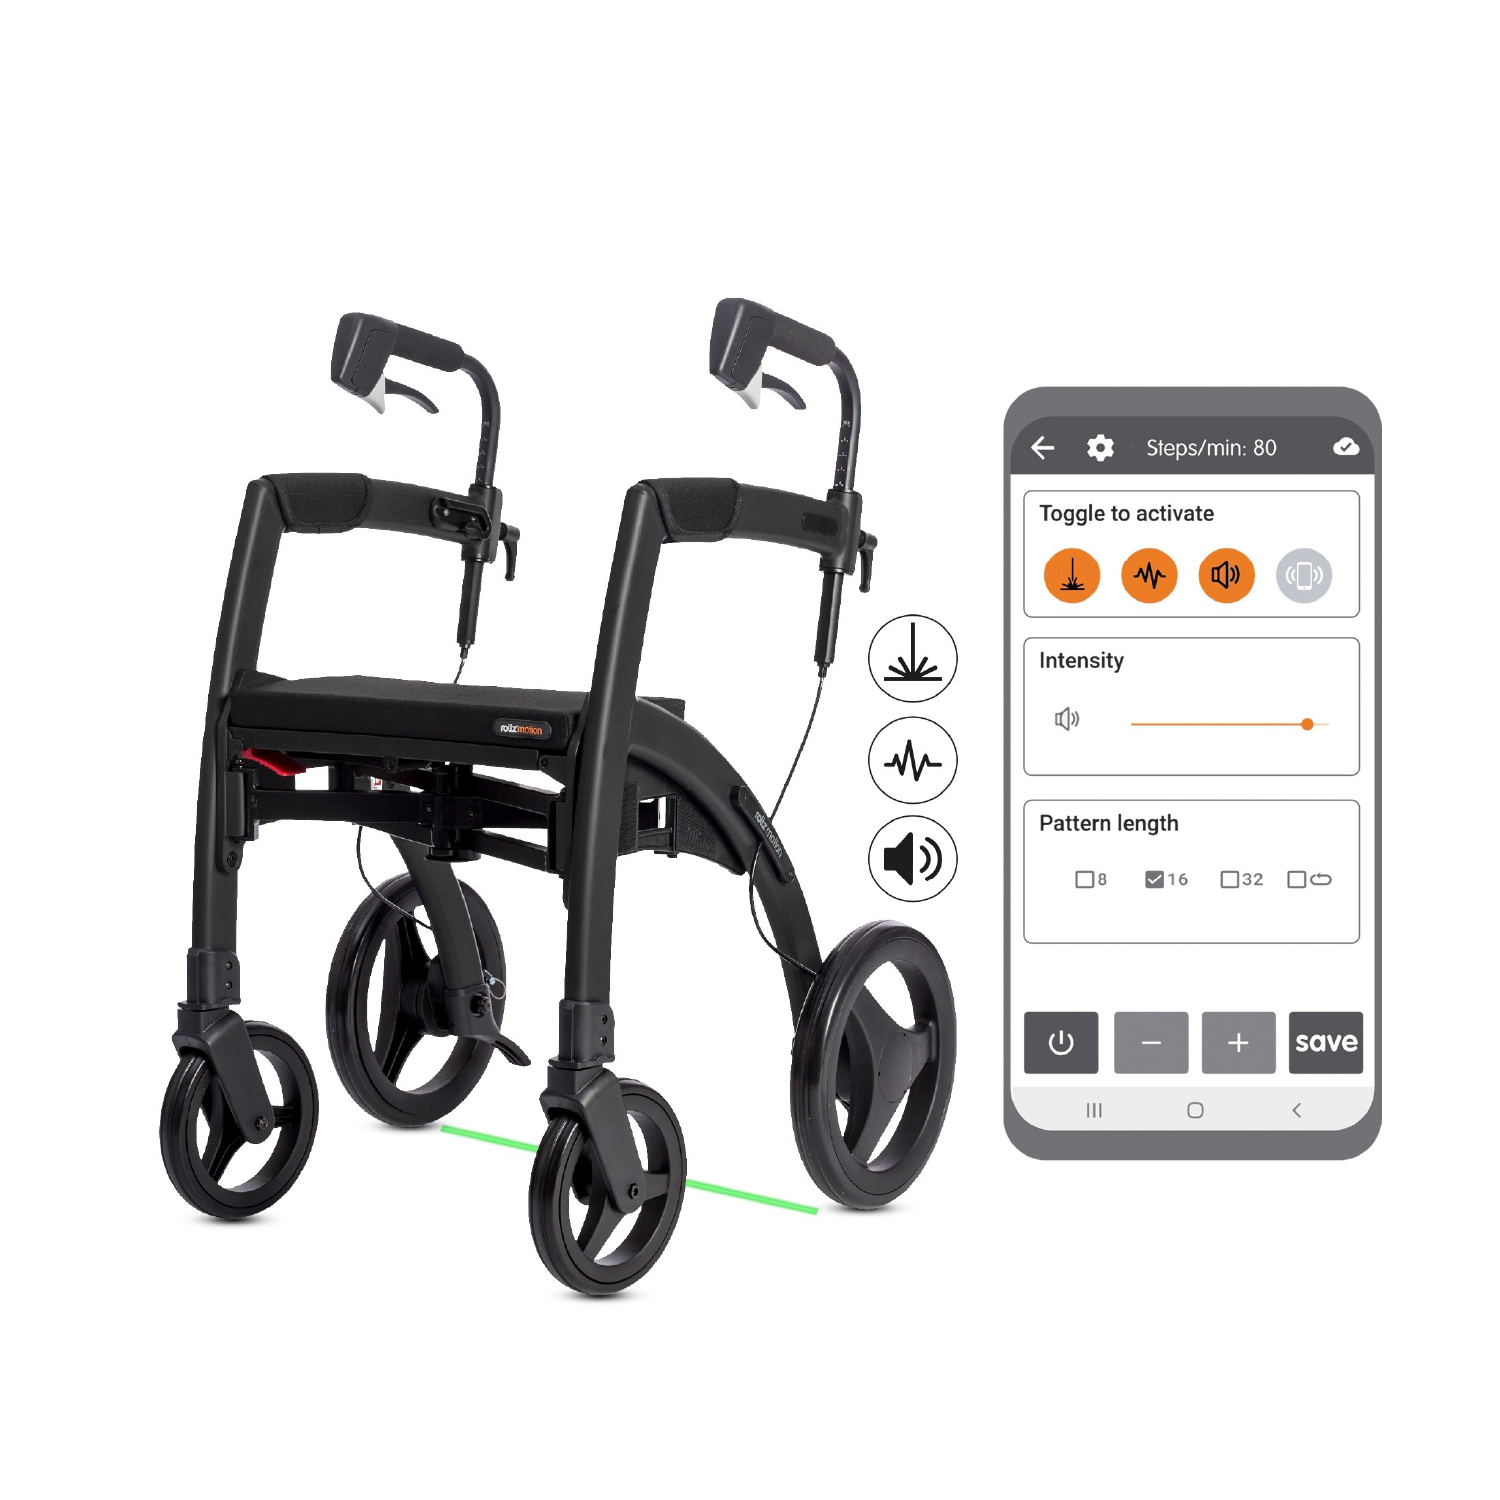 Rollz Motion Rhythm rollator with cues and app for Parkinson